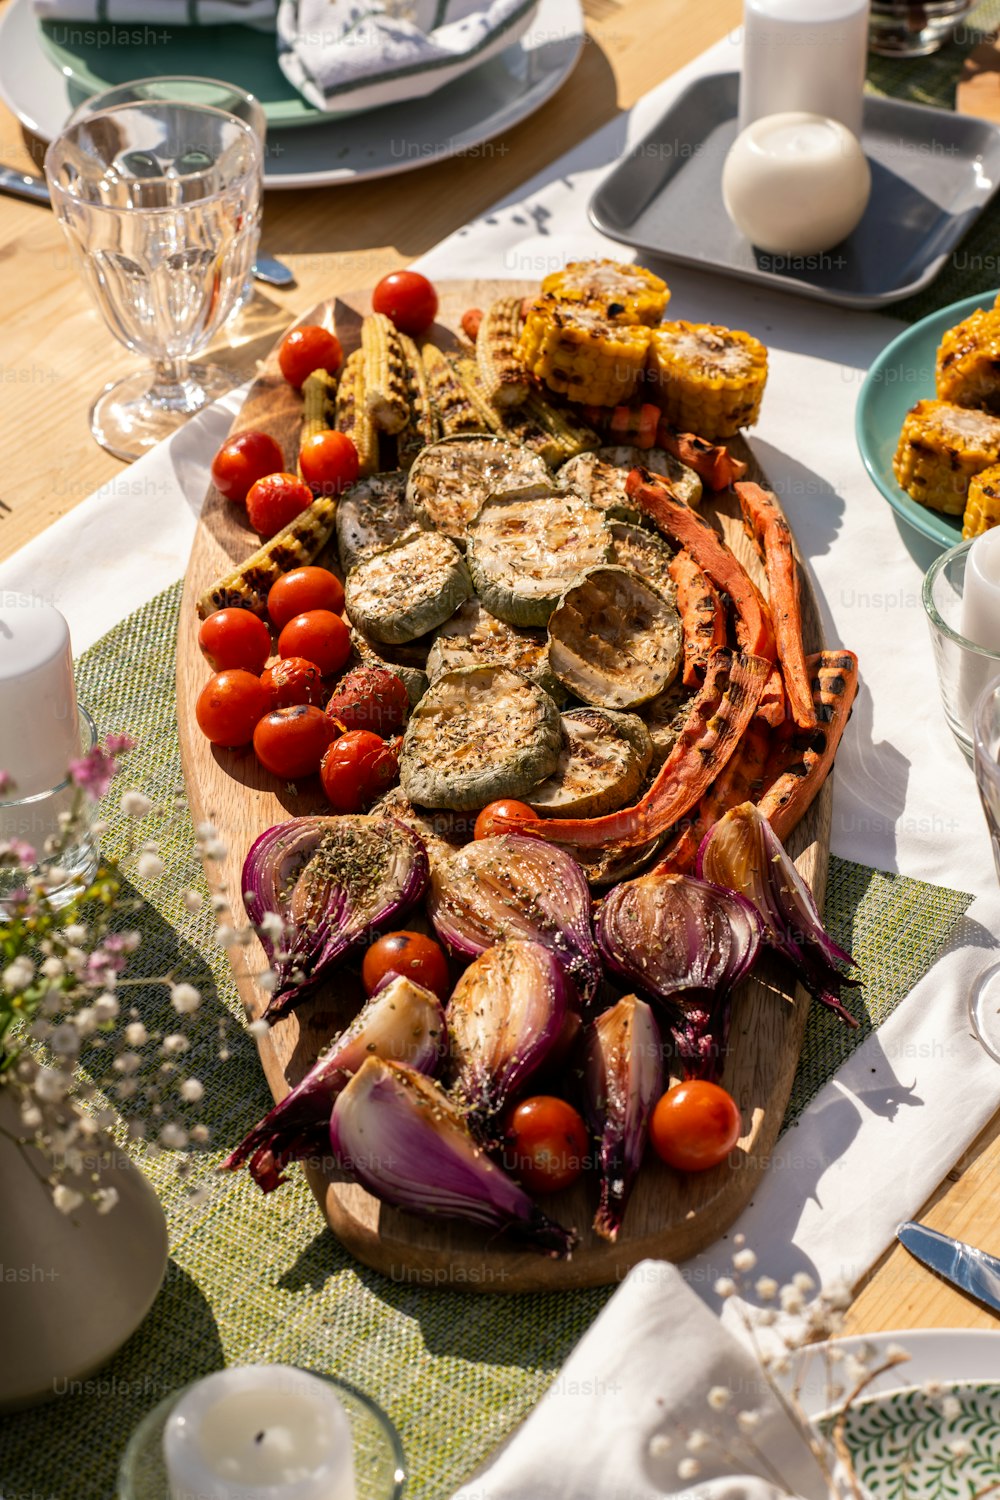 Tasty grilled vegetables like zuccini, carrots, red onions and tomatoes on big board